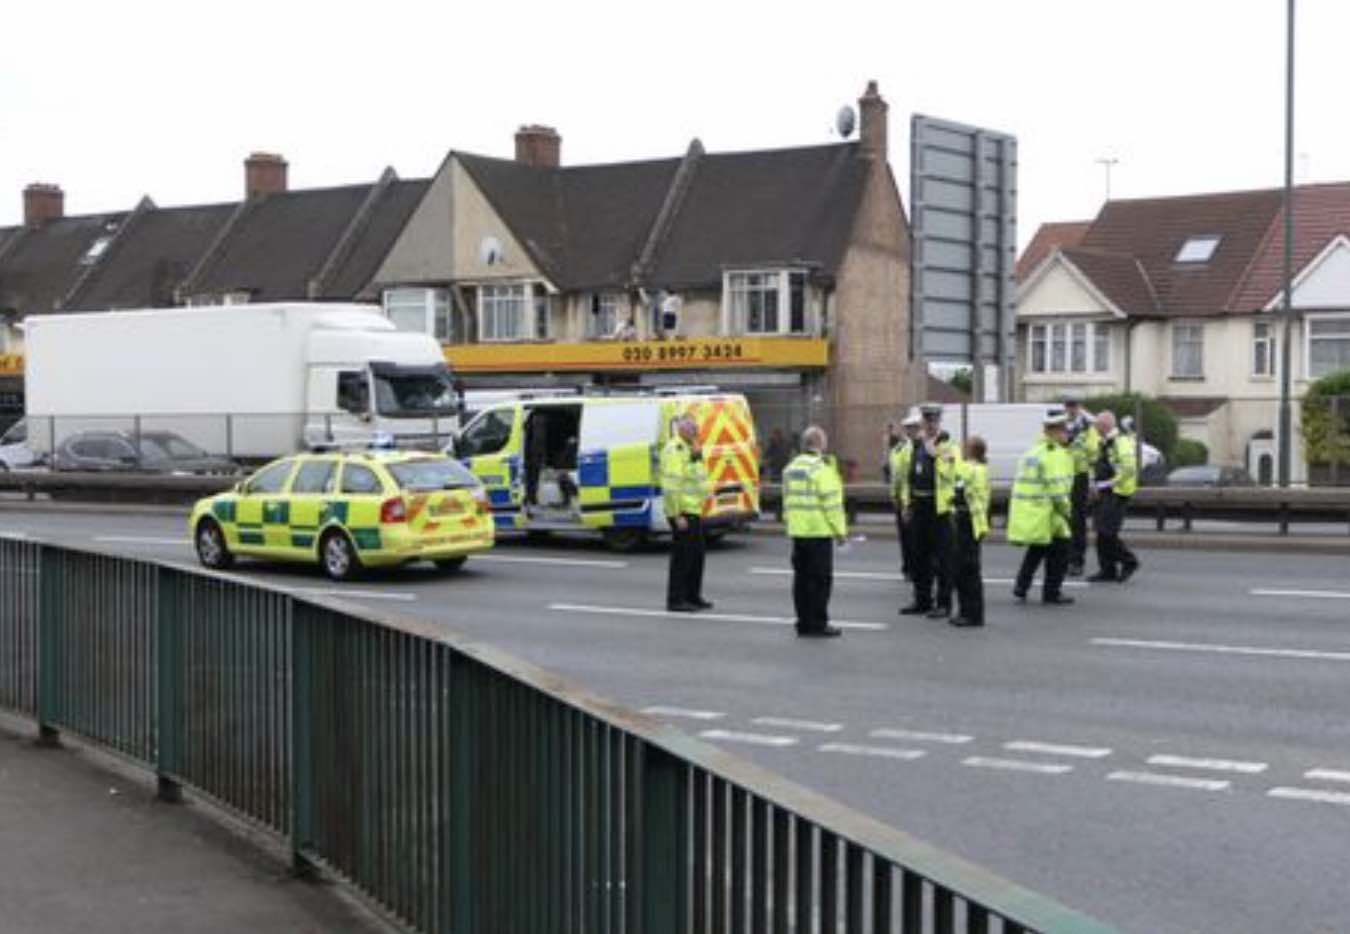 Nine People Treated After Serious Collision On The A406 At Neasden In North London